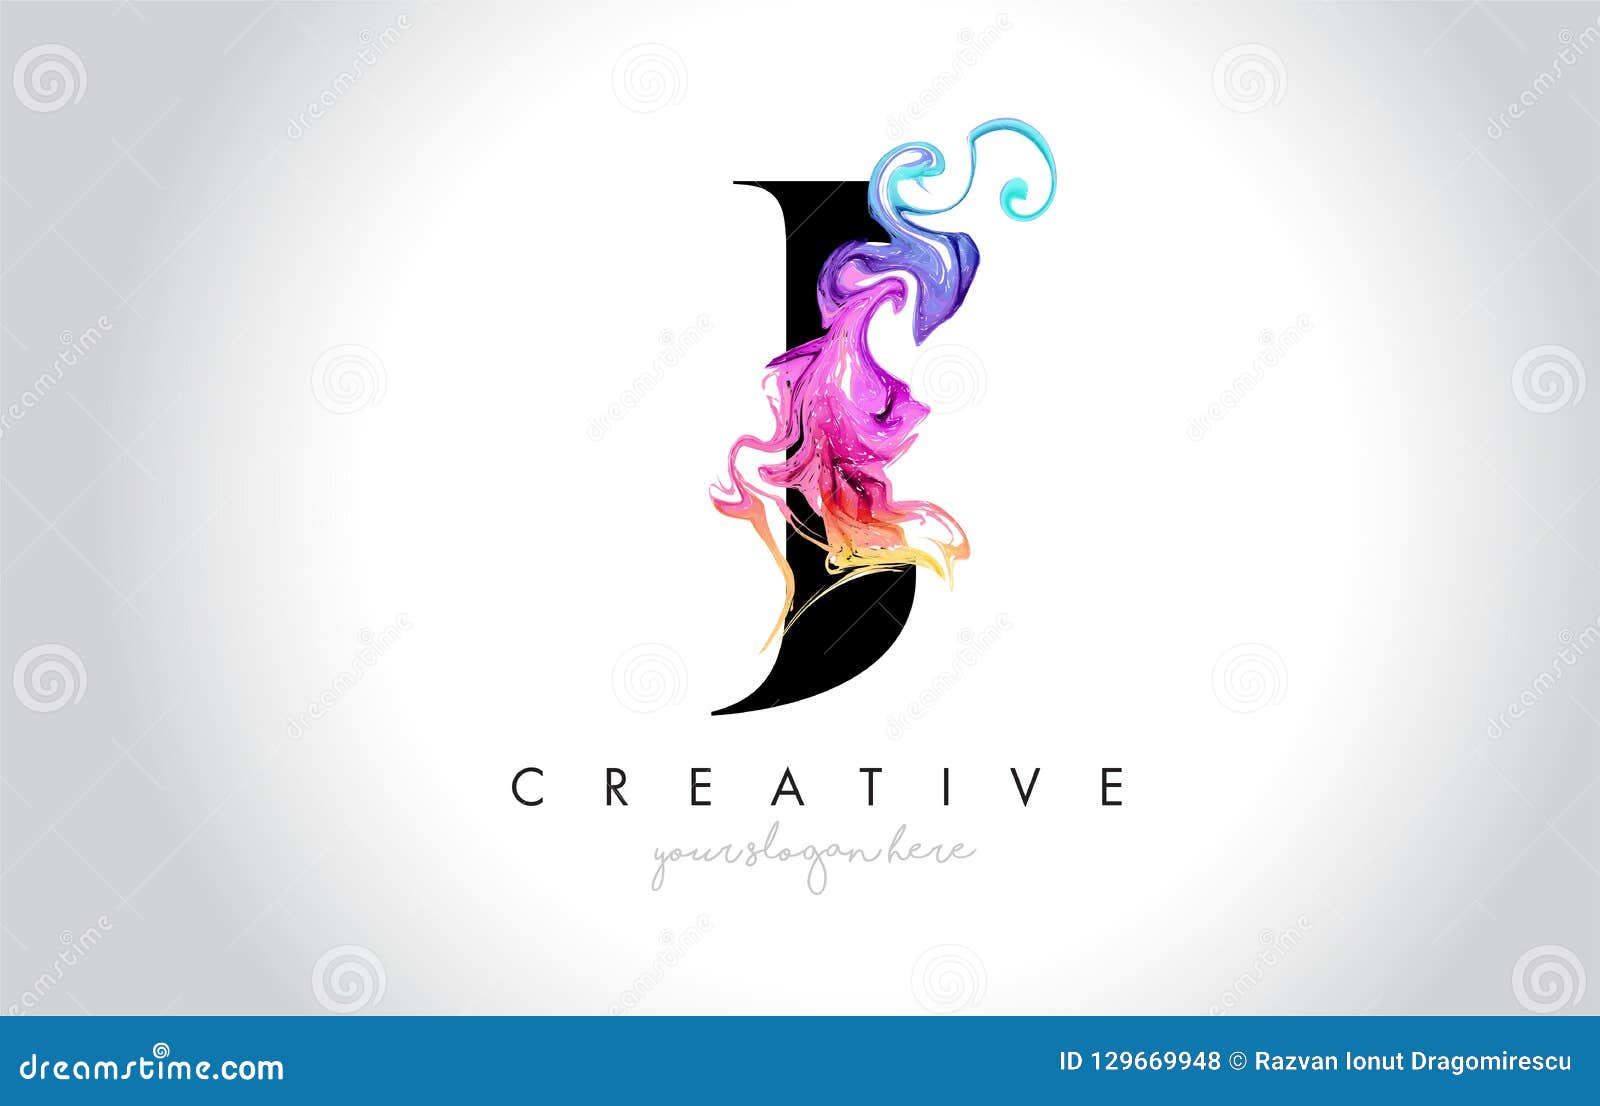 j vibrant creative leter logo  with colorful smoke ink flo